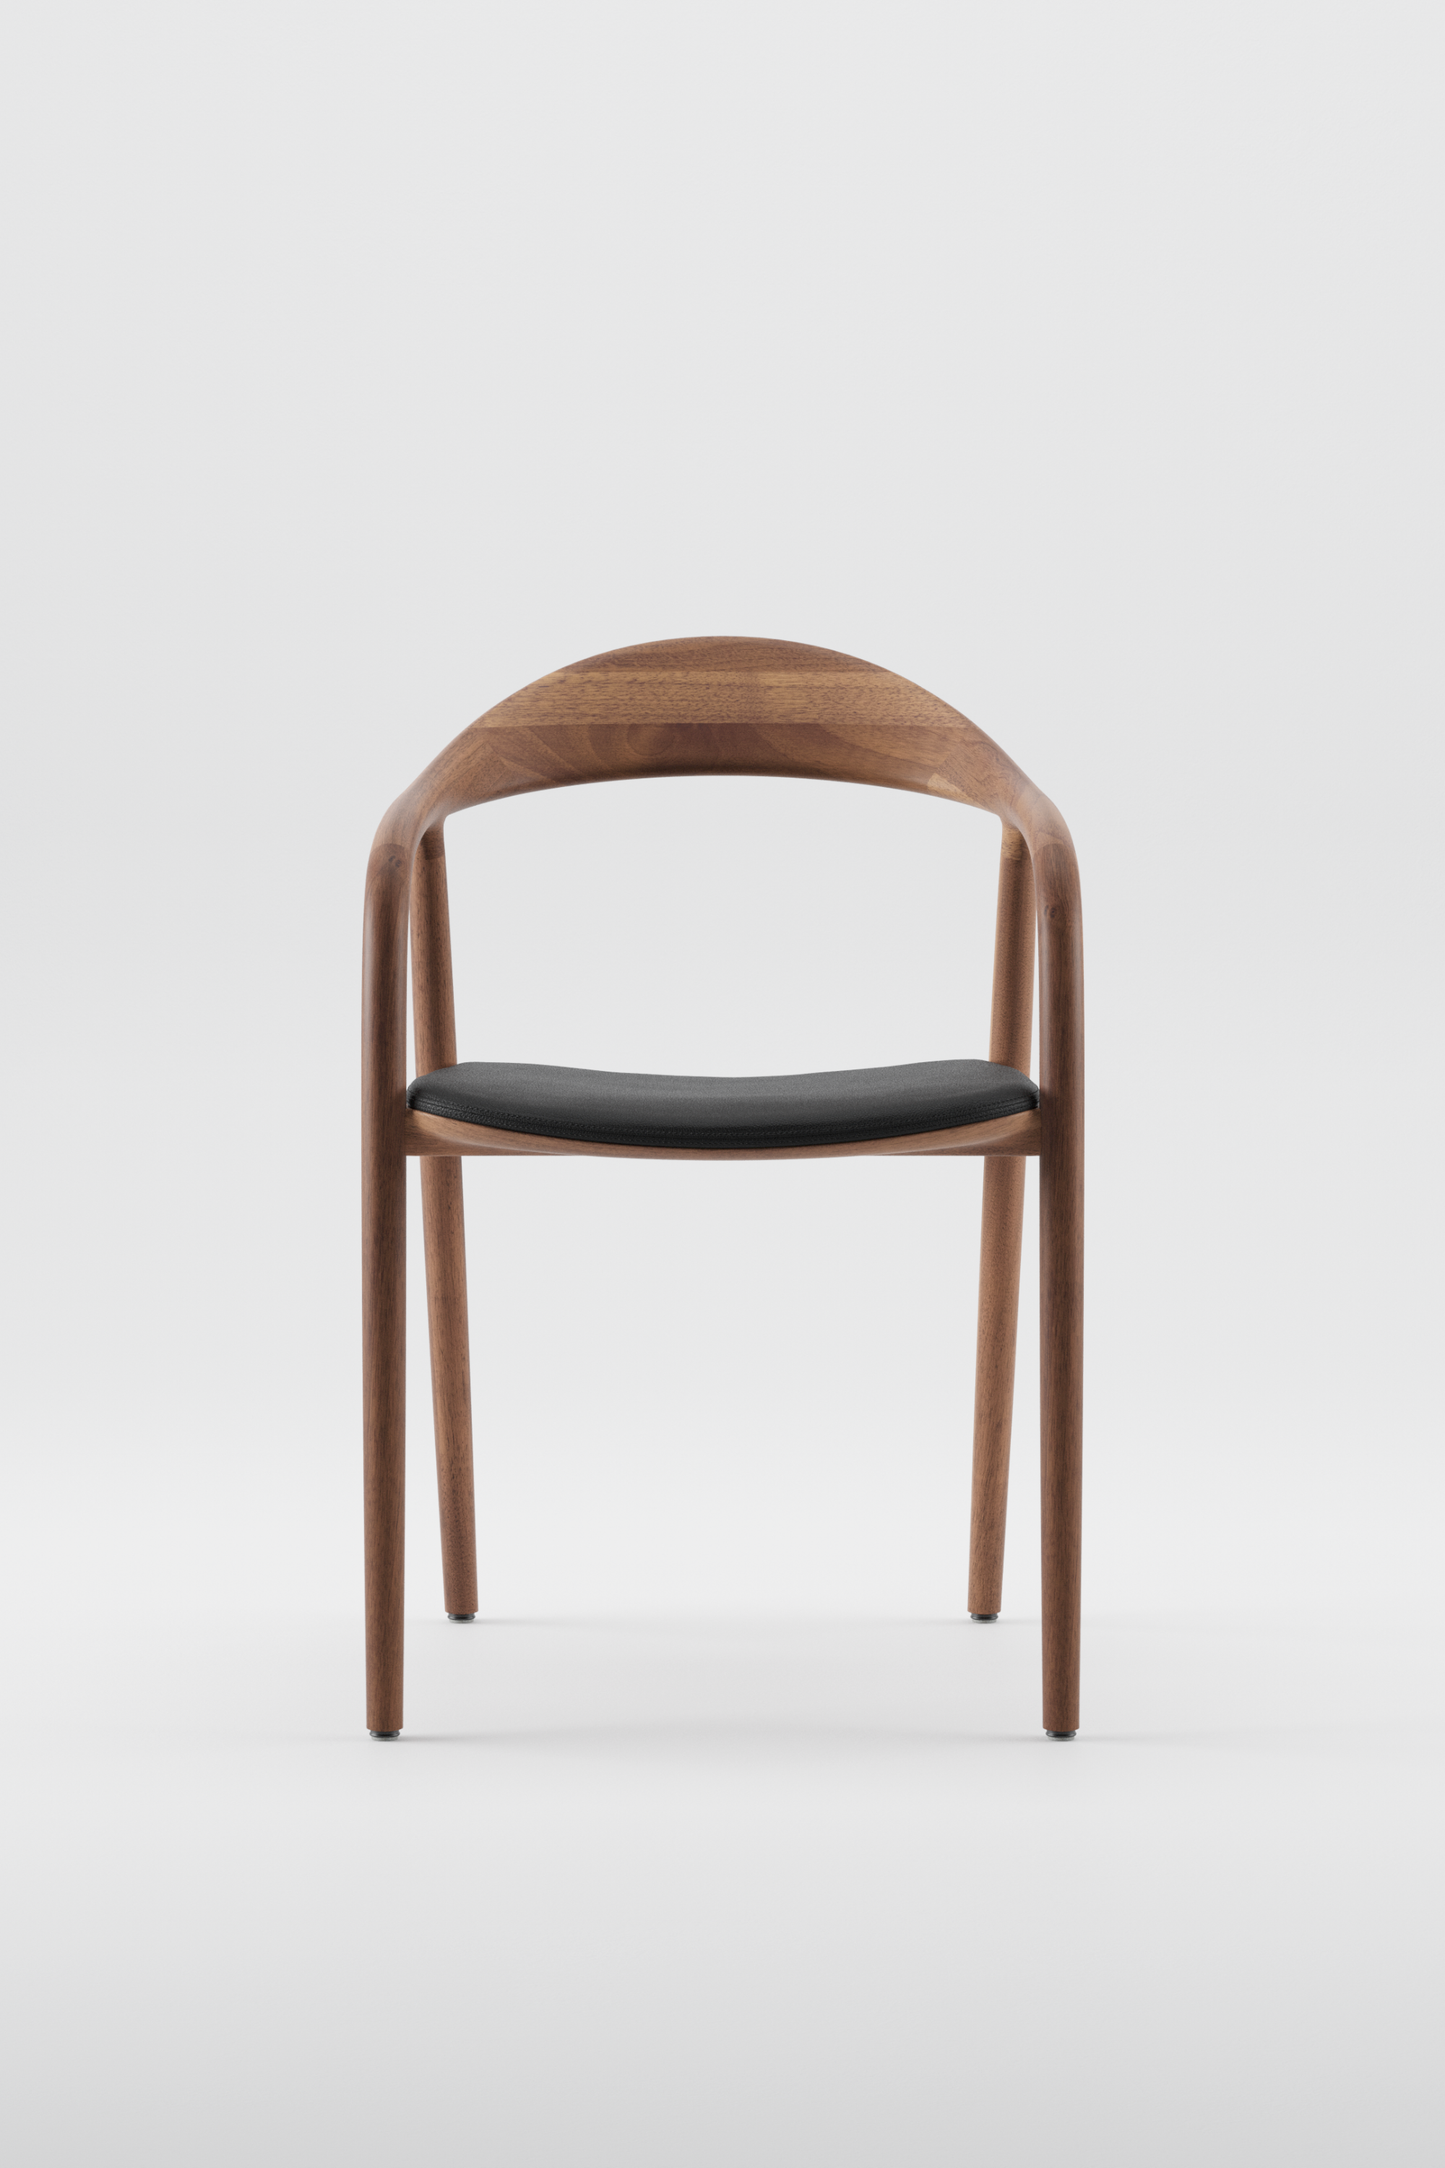 The Neva Chair in European Walnut with Upholstered seat in Leather by Artisan